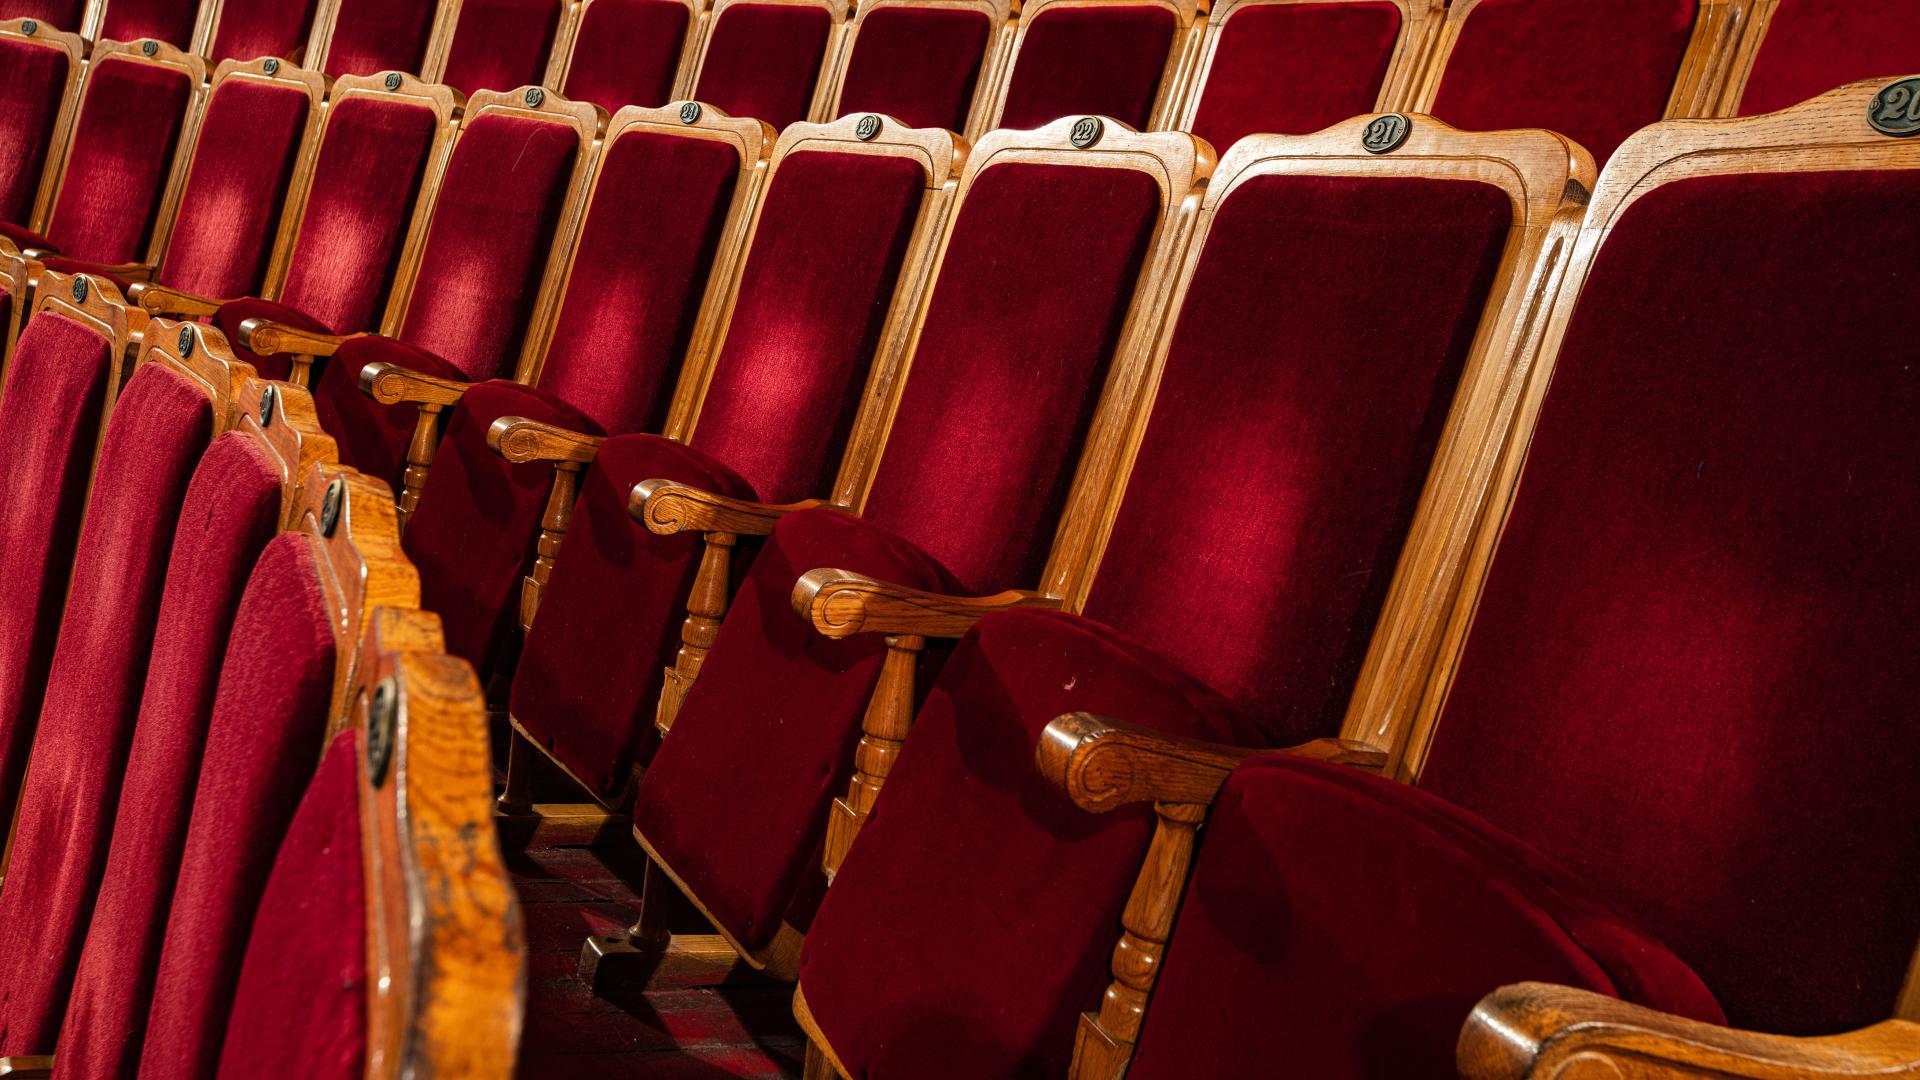 Rows of theatre seats